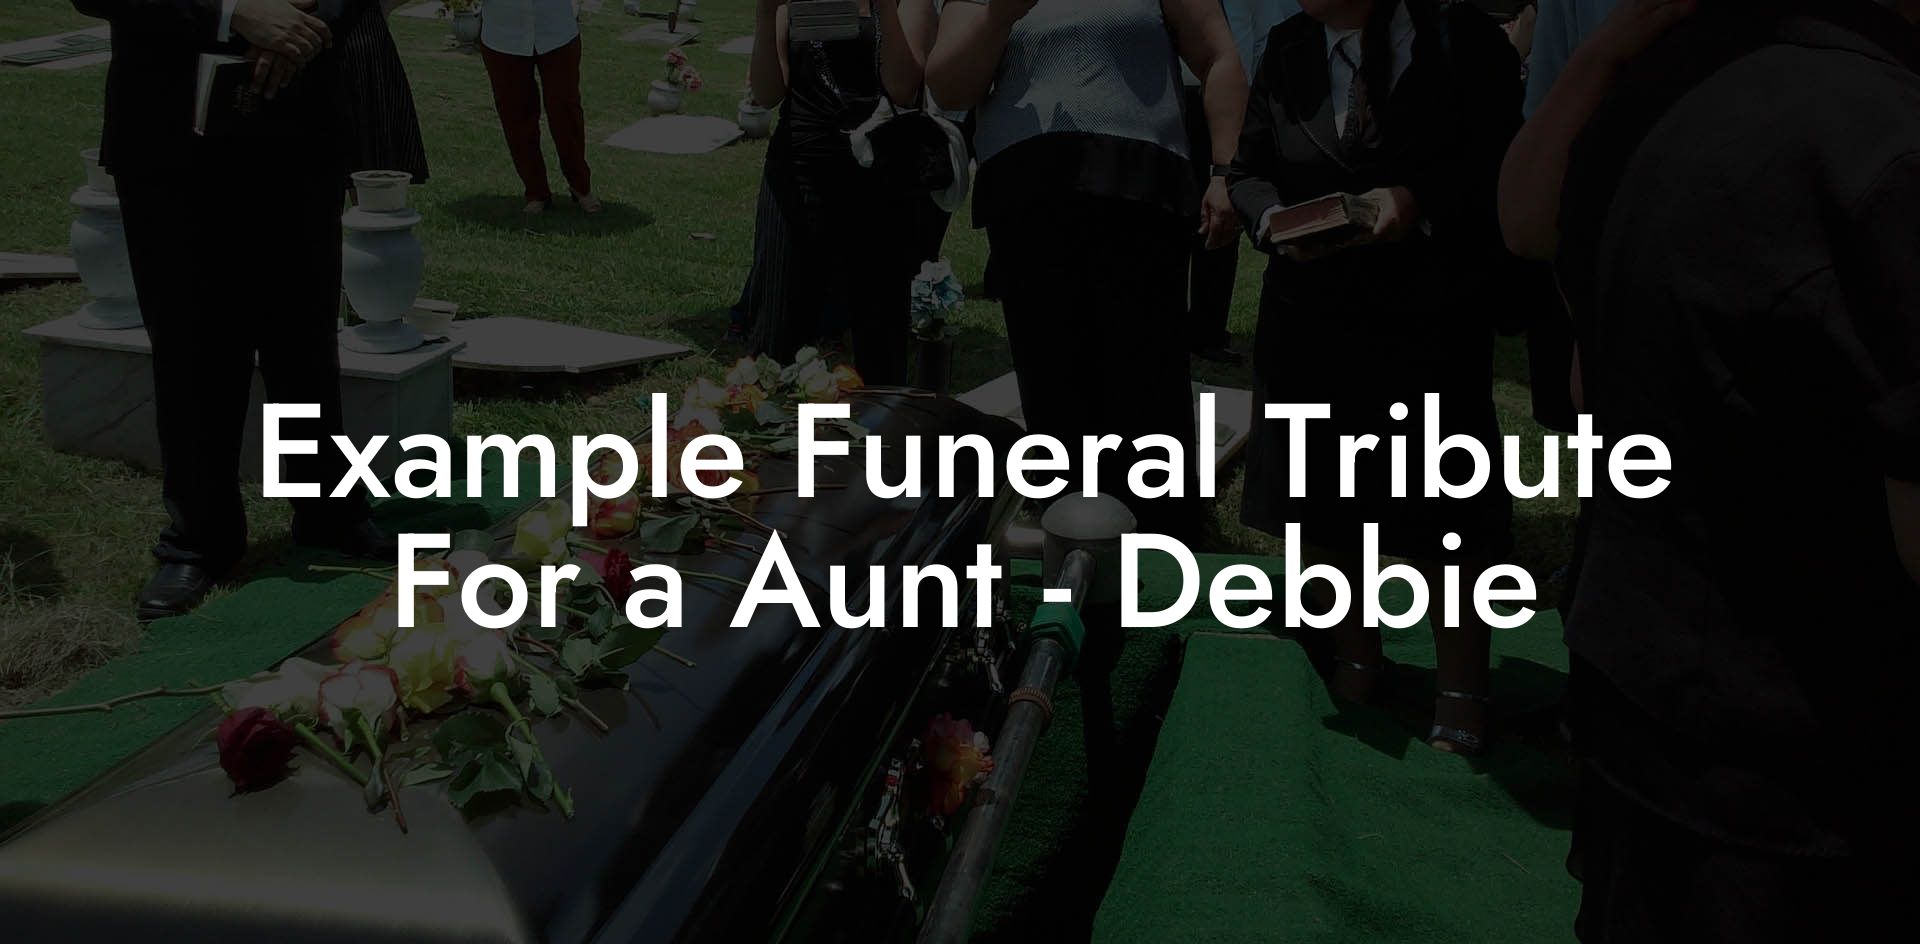 Example Funeral Tribute For a Aunt - Debbie